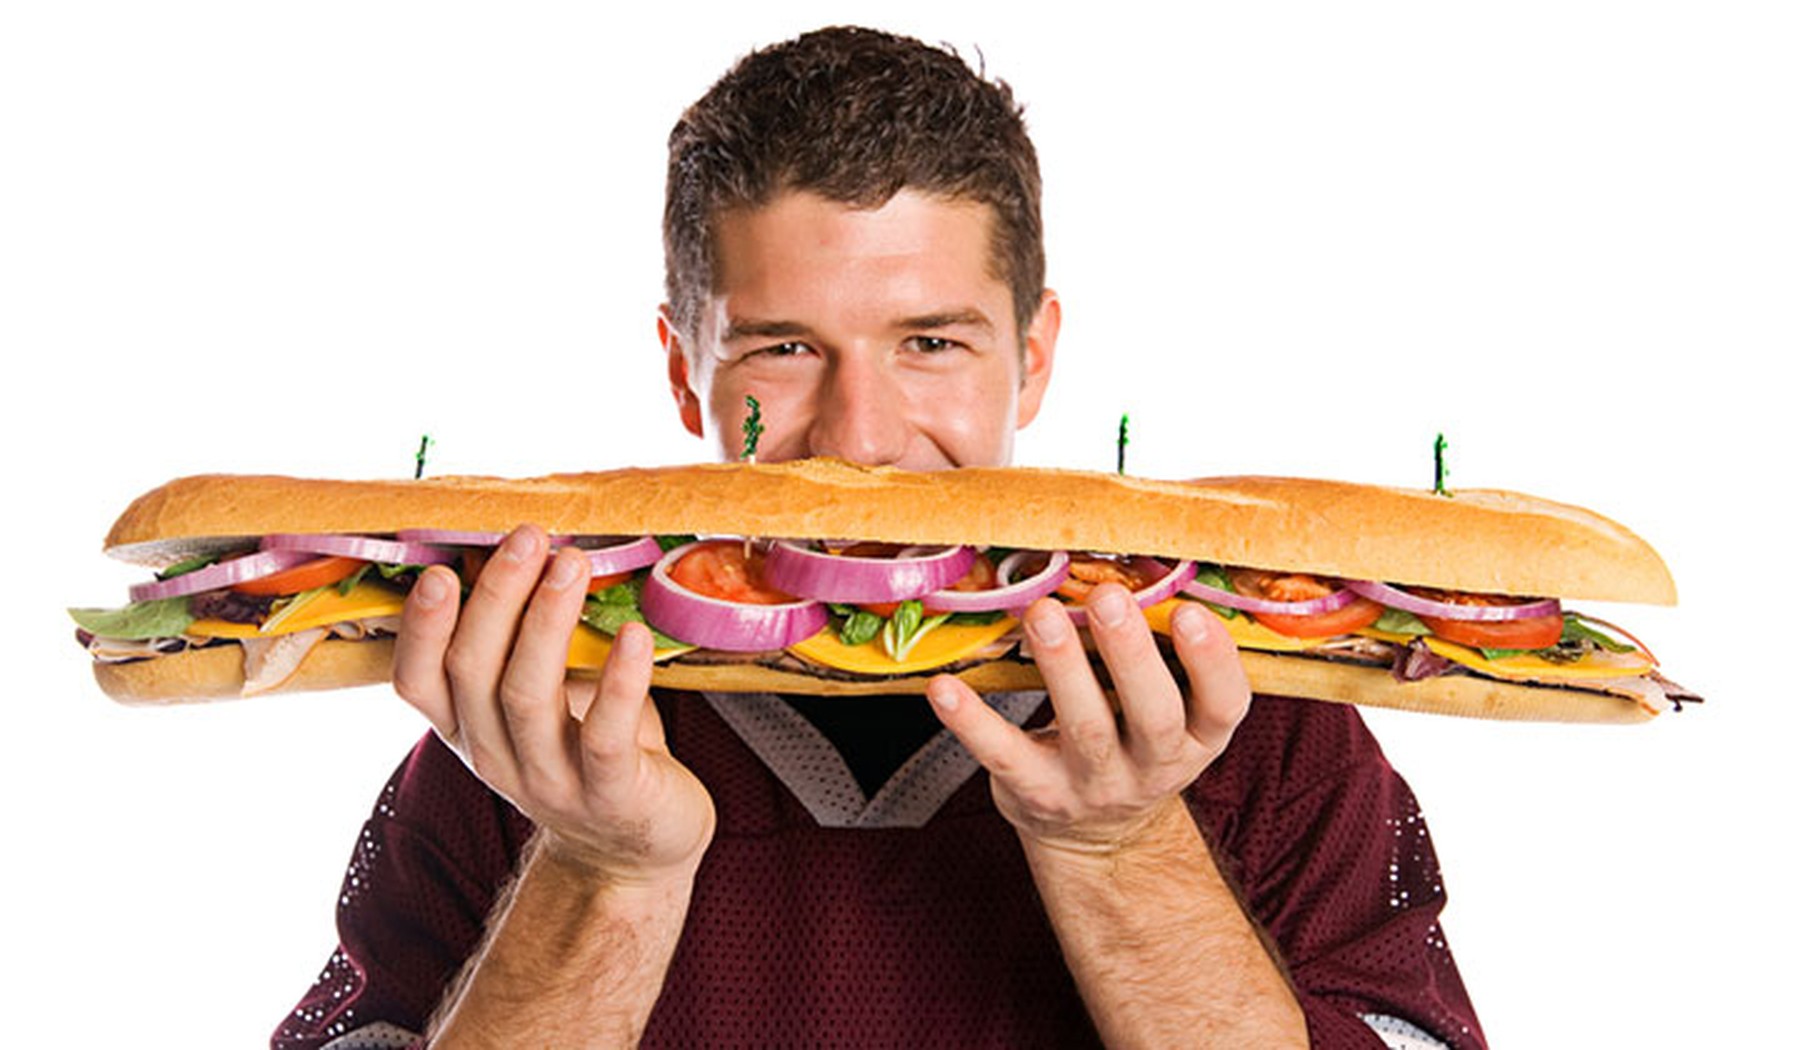 Young man holding a sub sandwich